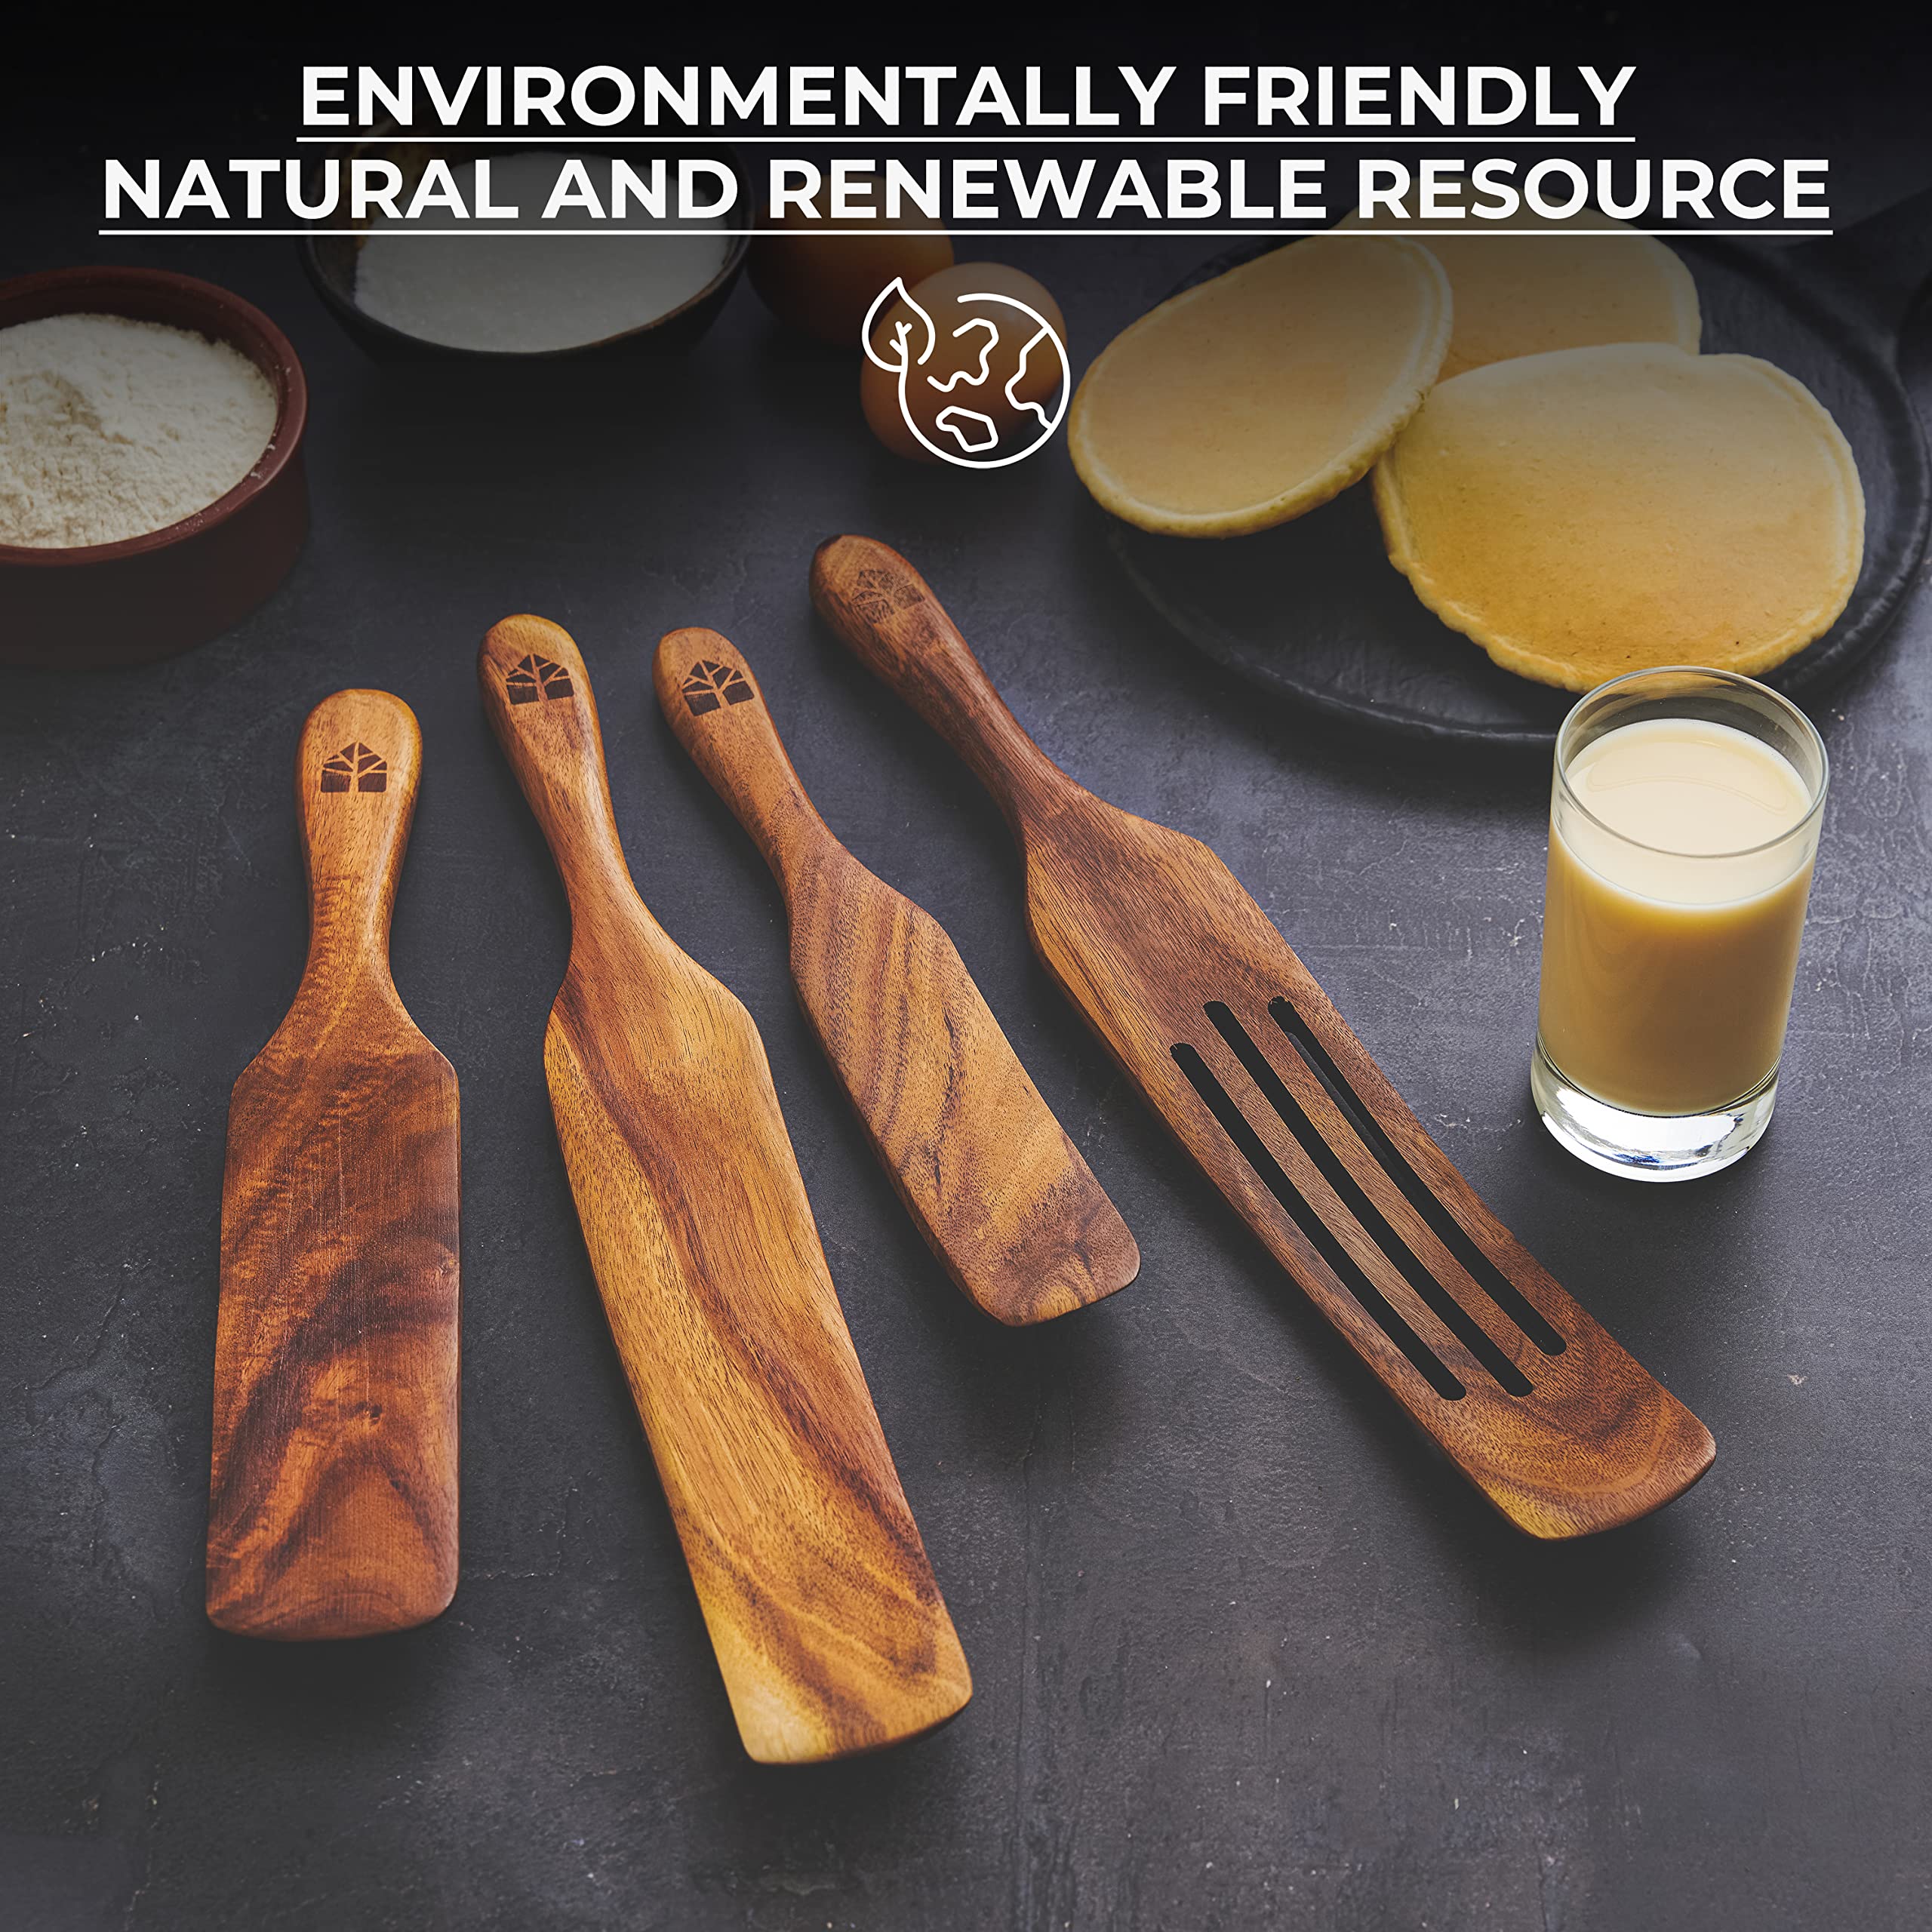 WOODENHOUSE LIFELONG QUALITY wooden spurtle set, teak spurtles kitchen  tools, wooden spatula for cooking, wood utensils